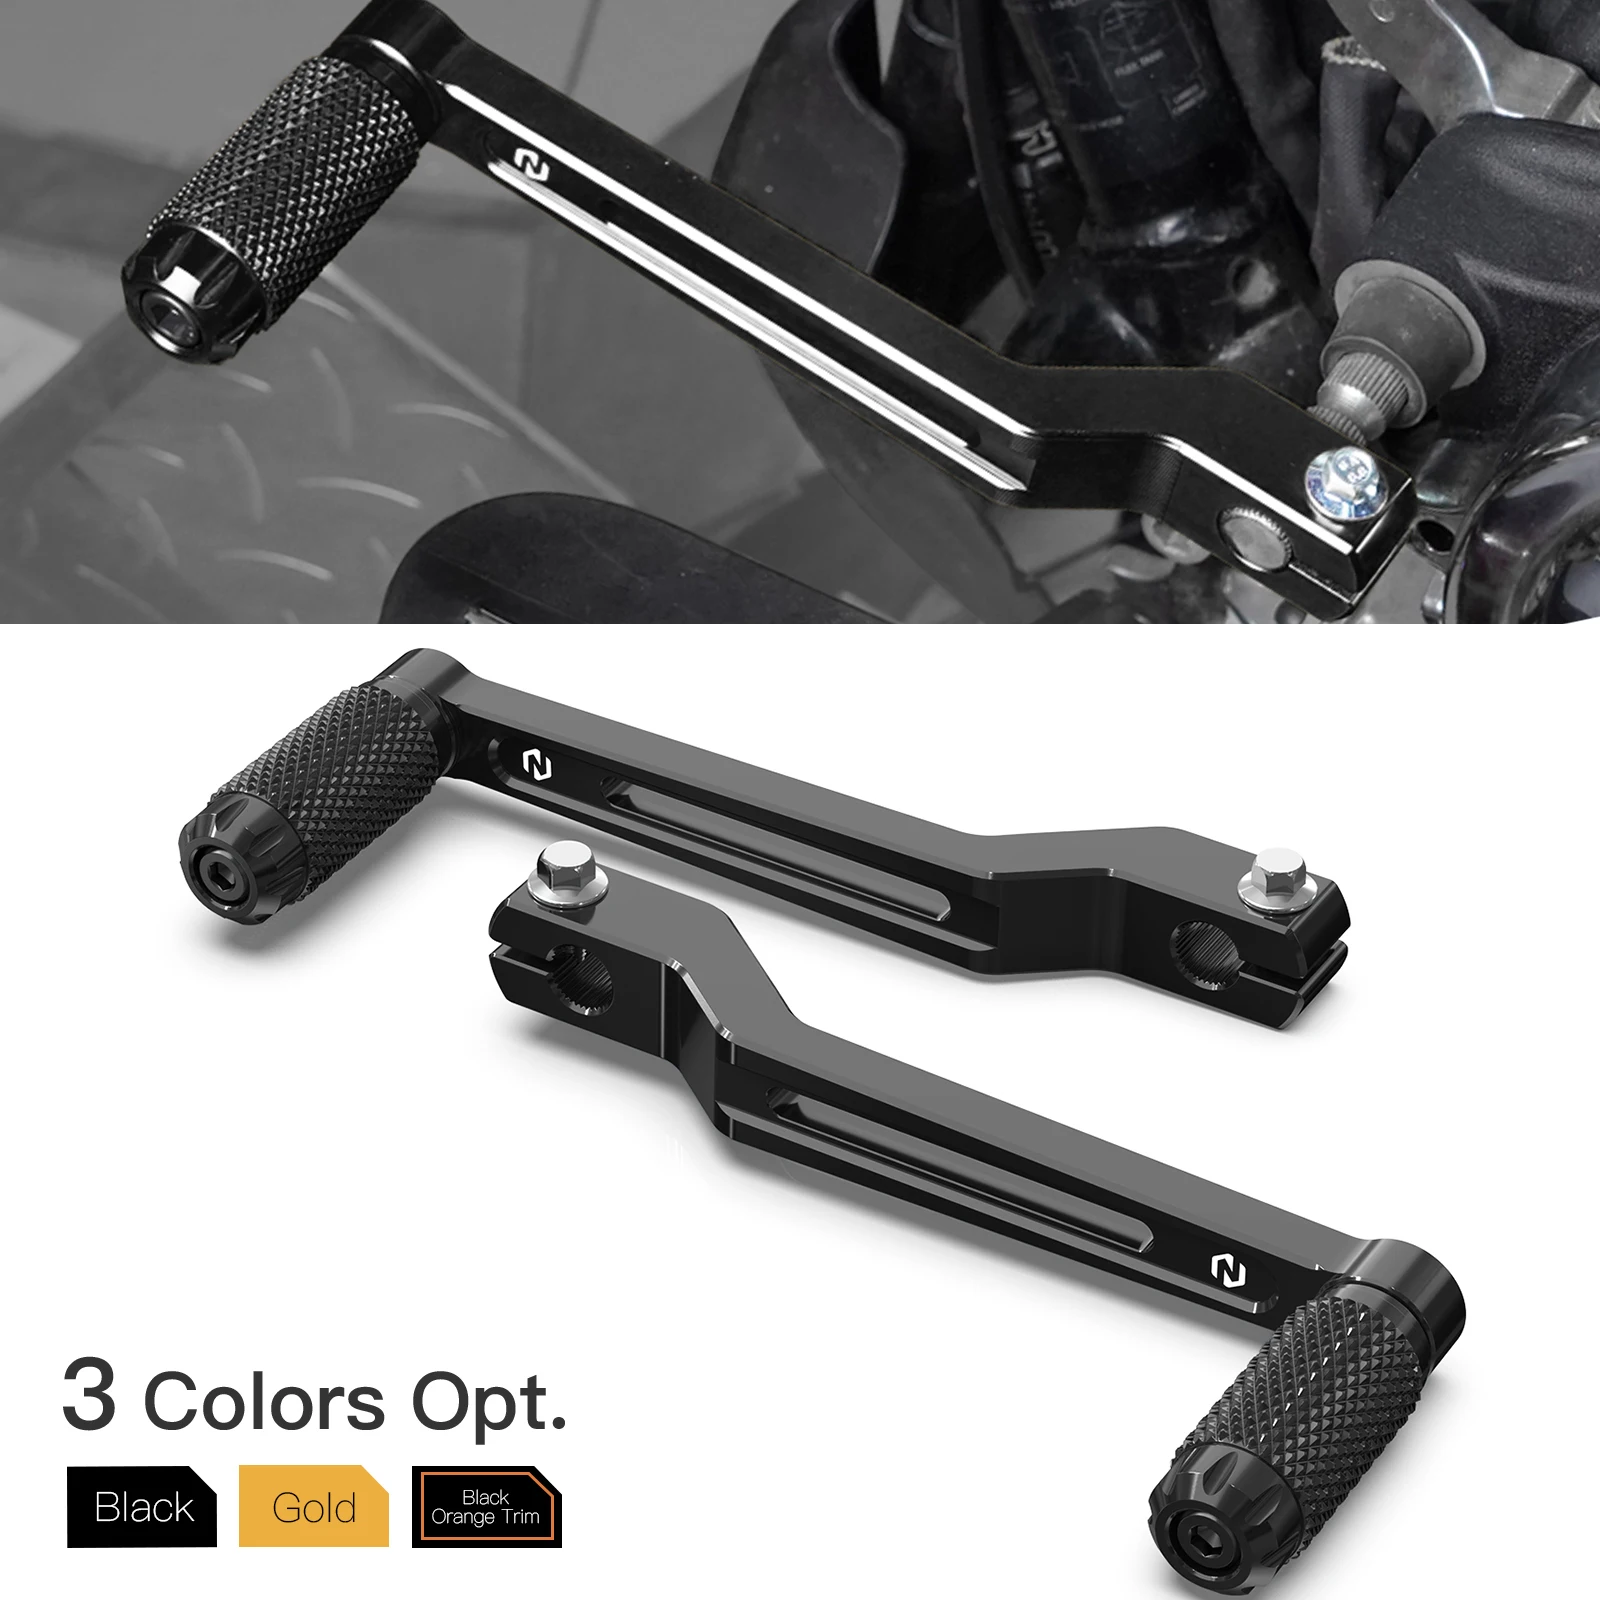 Gear Shift Lever Shifter Levers For Harley Softail Fat Boy Touring Road King - £70.59 GBP